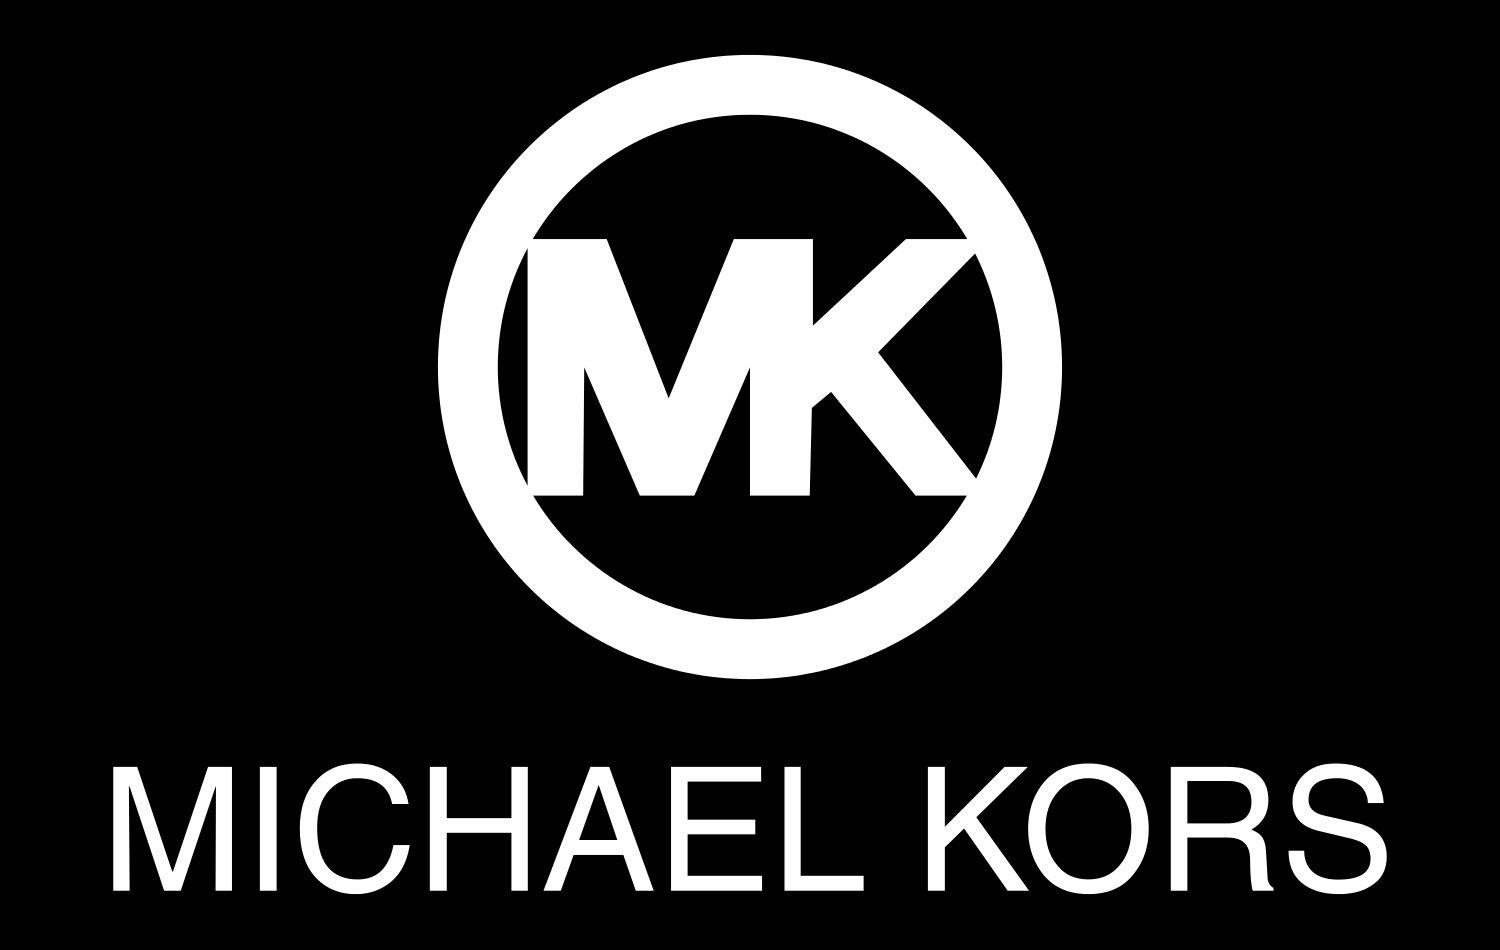 Michael Kors Logo - Michael Kors Logo, Michael Kors Symbol, Meaning, History and Evolution